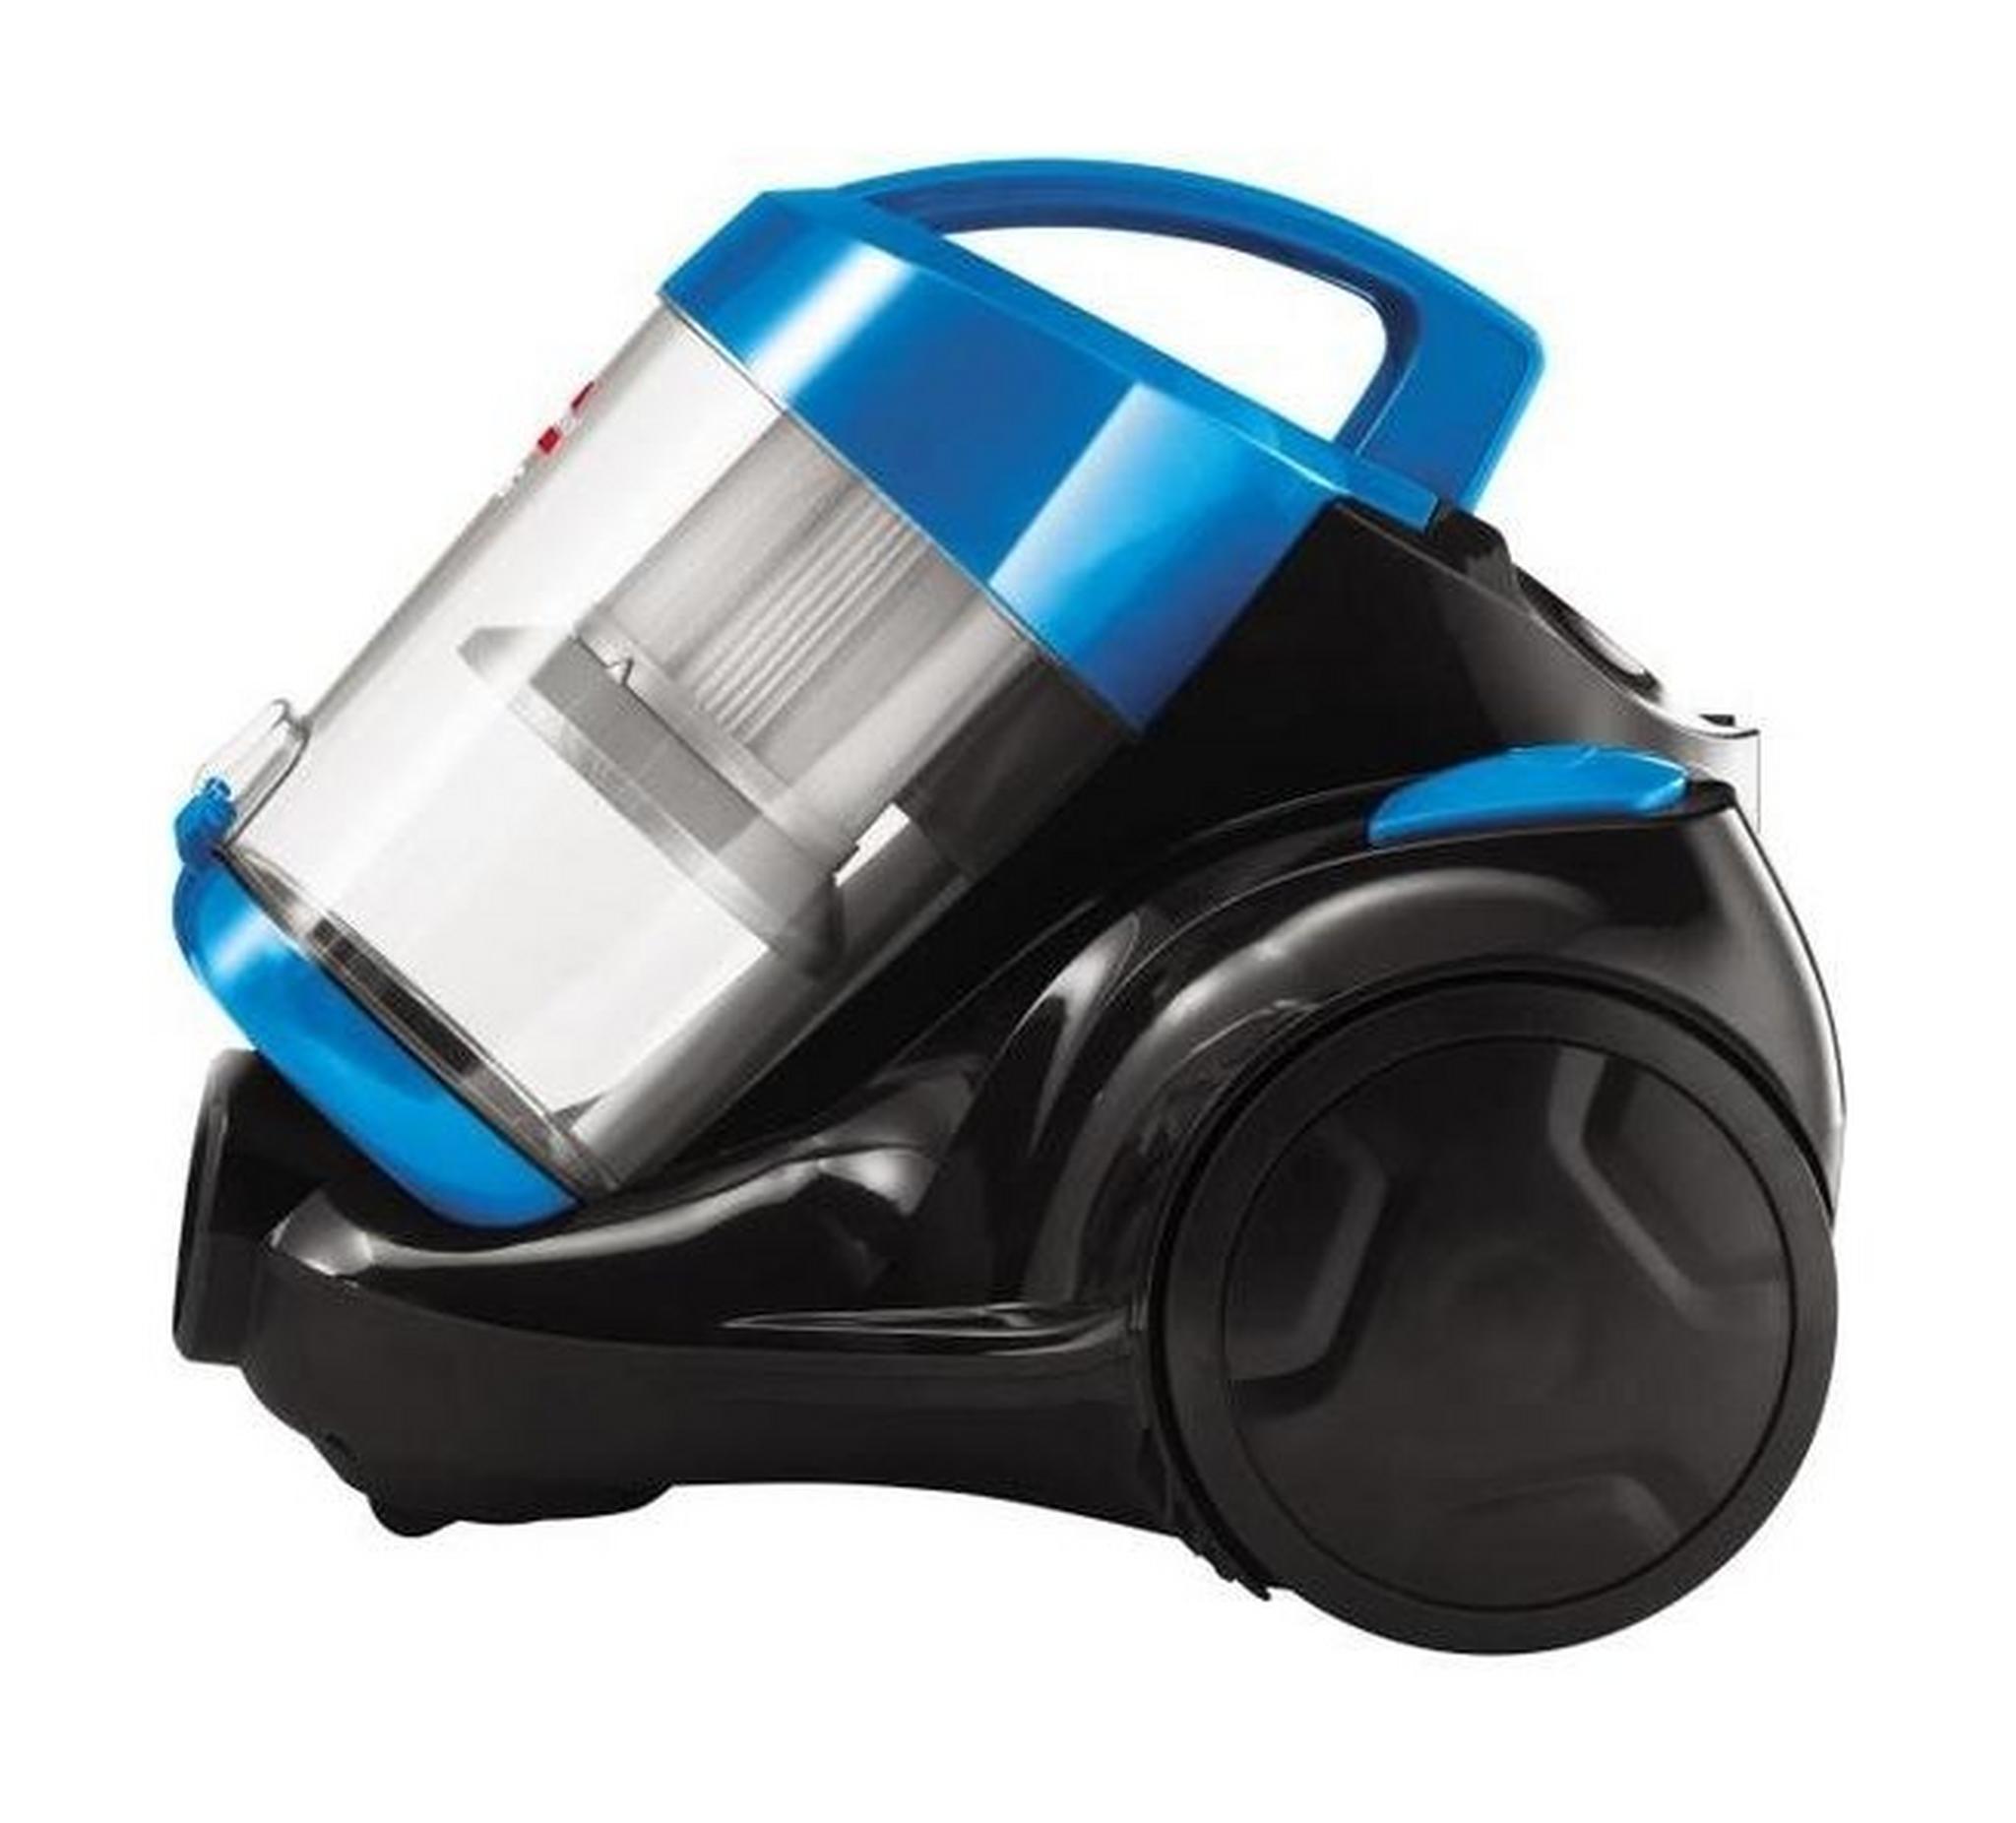 Bissell Zing Bagless Canister Vacuum Cleaner,1500W,2.5 Liters, 2155E - Black